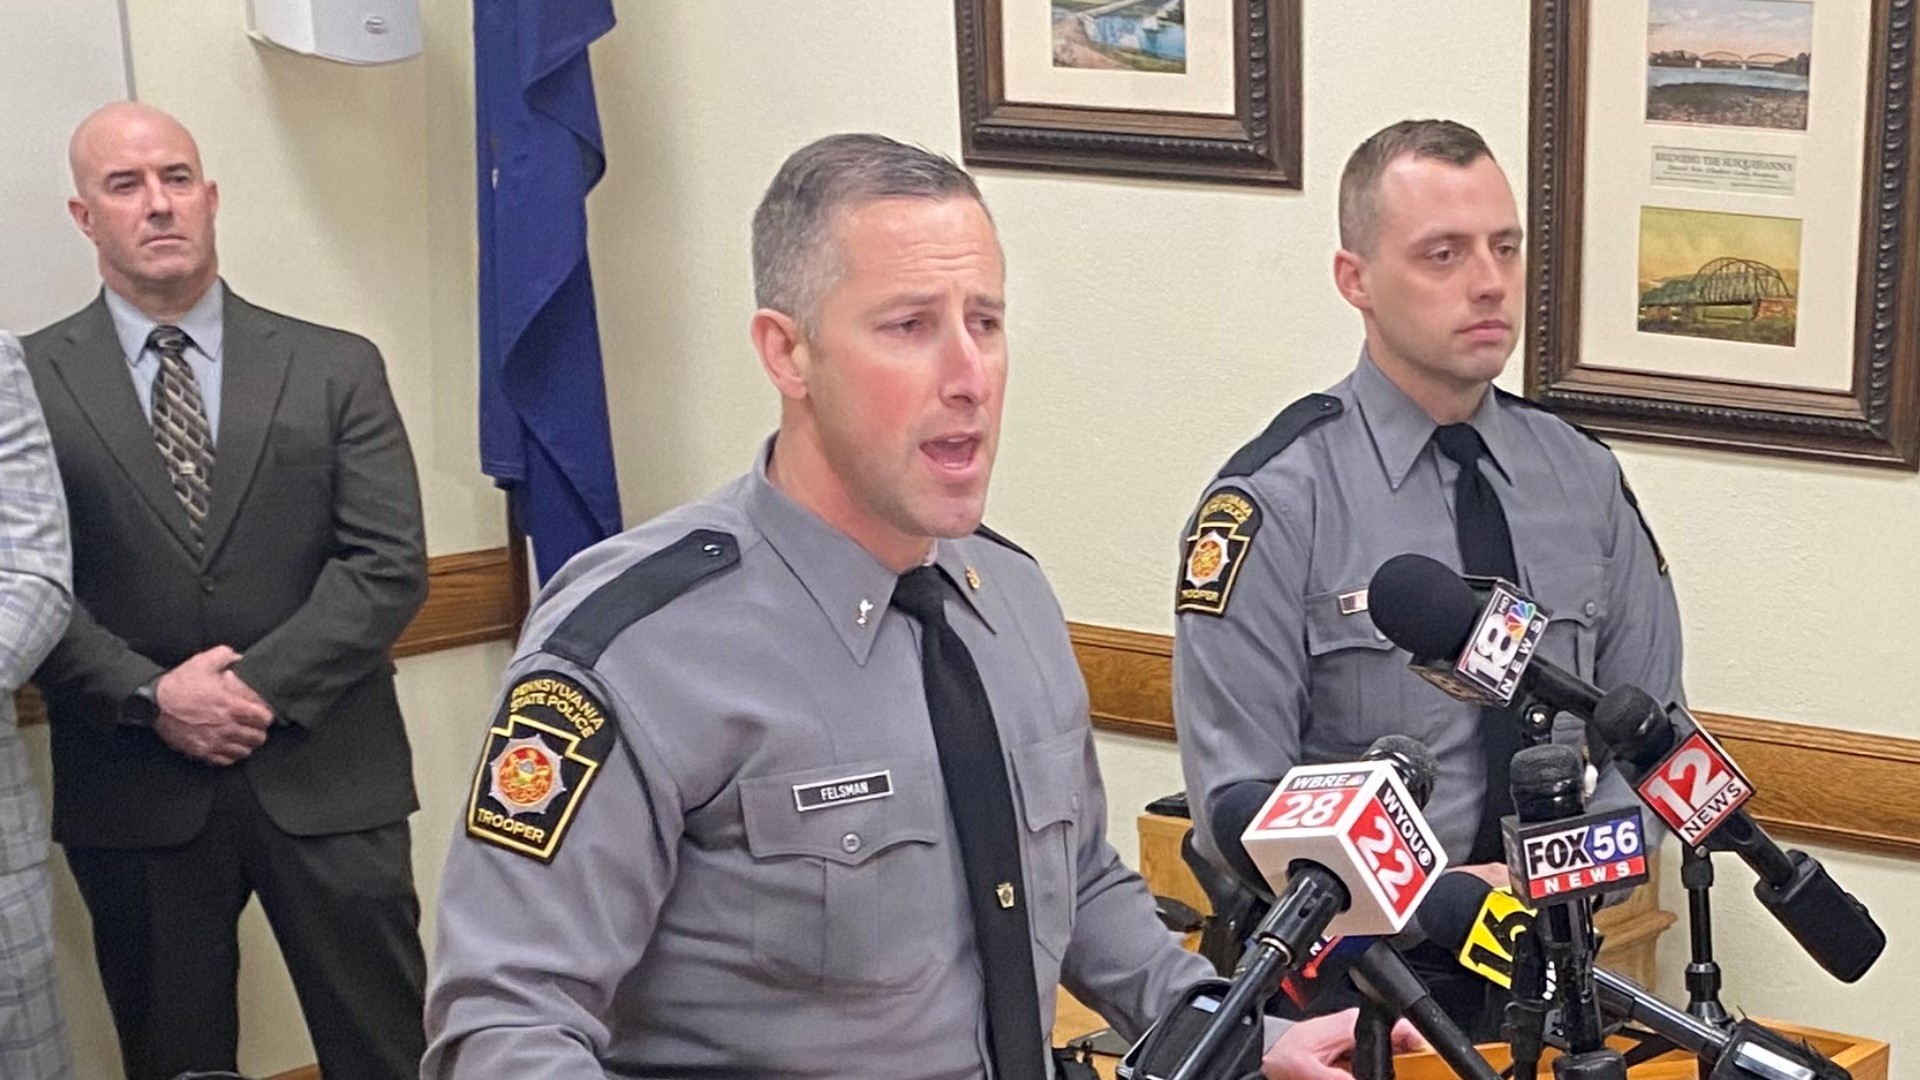 It's been a week since troopers arrested Terry Parker, Ronda Parker, and Summer Heil in connection with the death of Michael Pruitt.